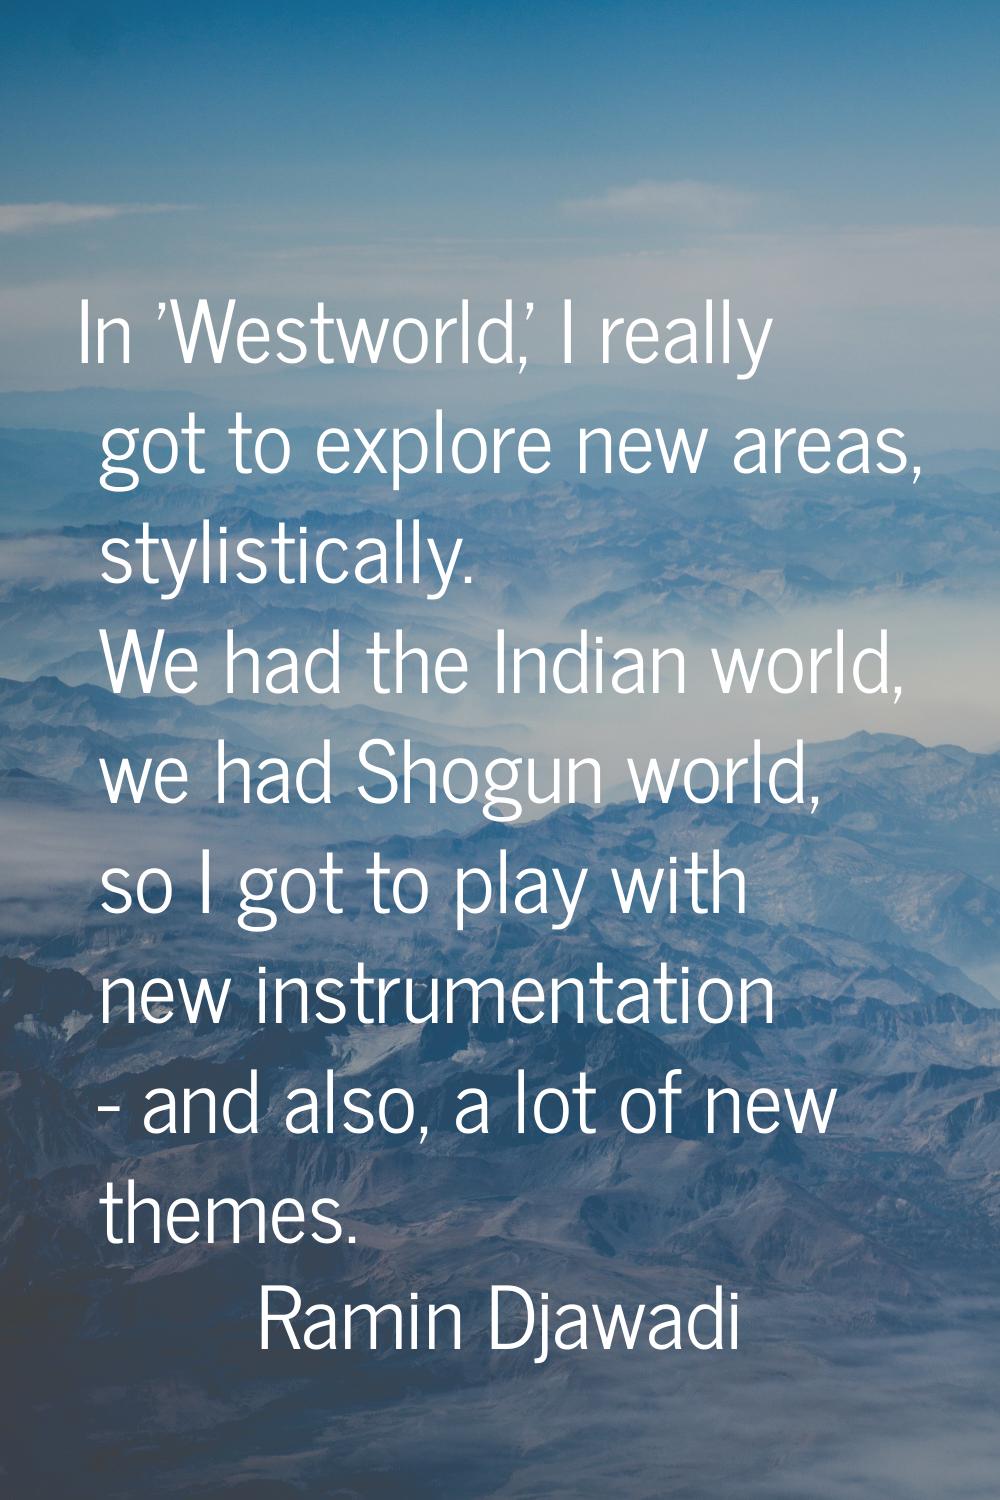 In 'Westworld,' I really got to explore new areas, stylistically. We had the Indian world, we had S